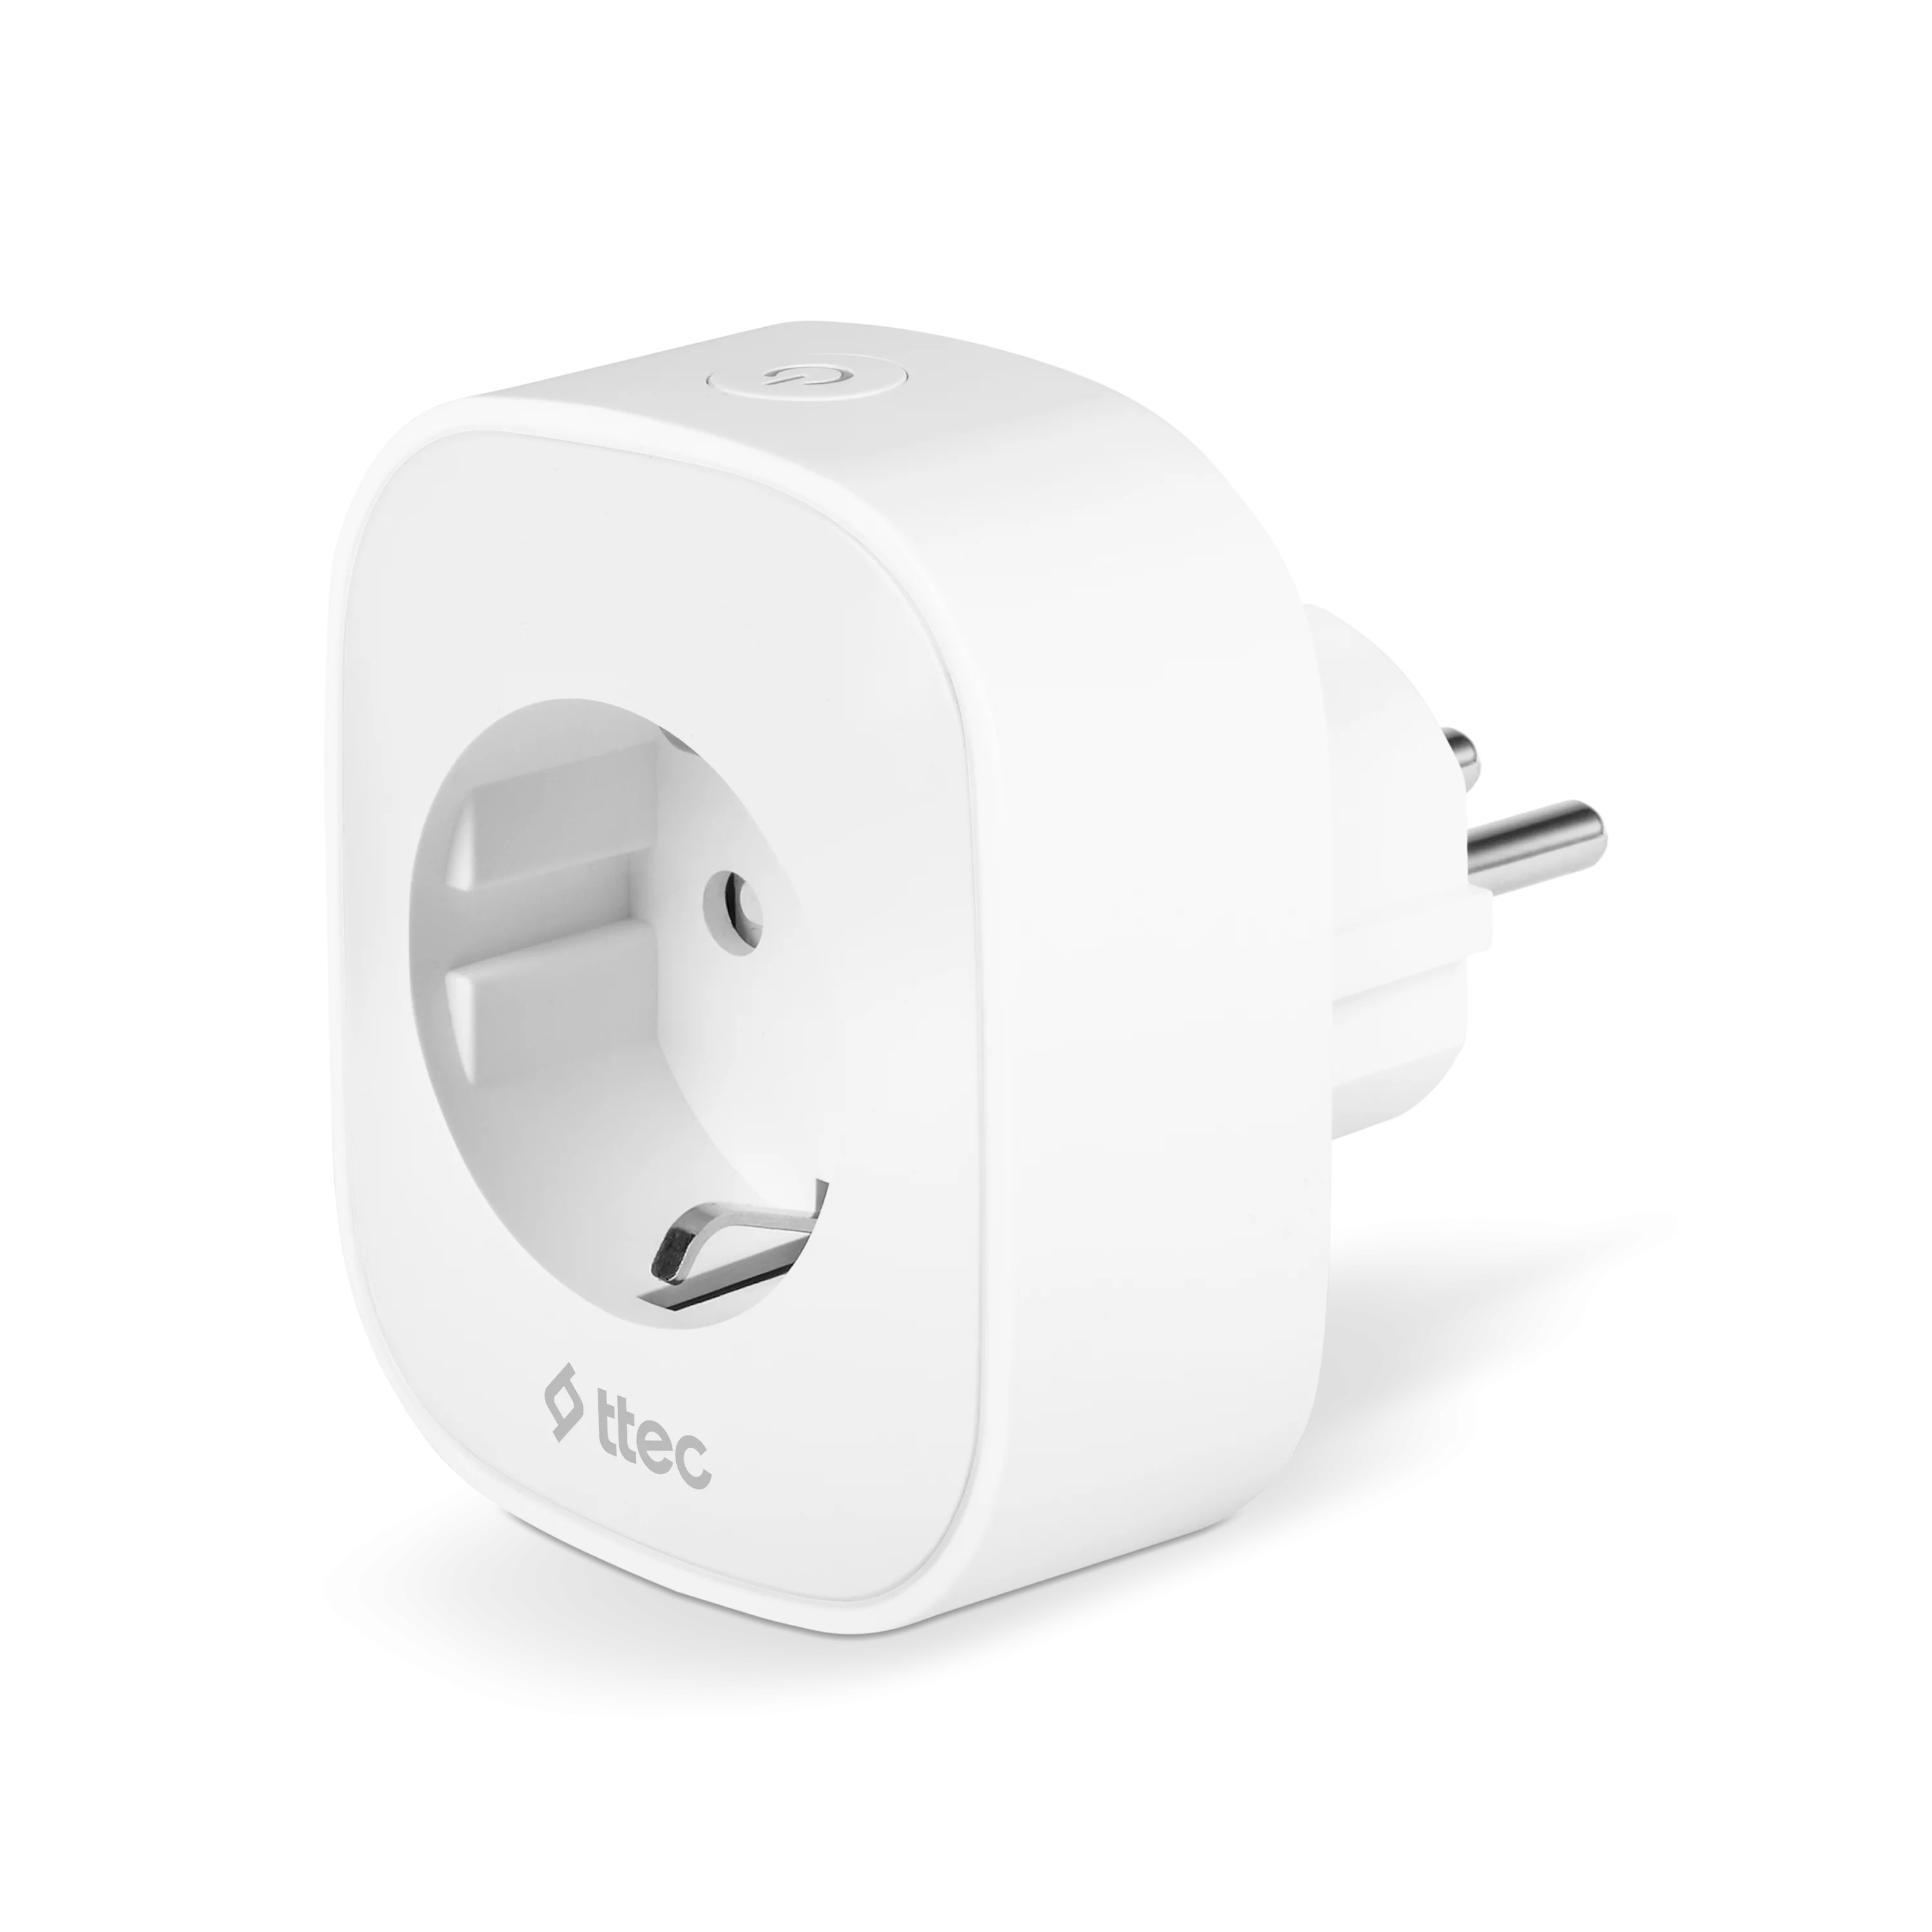 Ttec Prizi 16A WiFi Smart plug with Current Protection - White